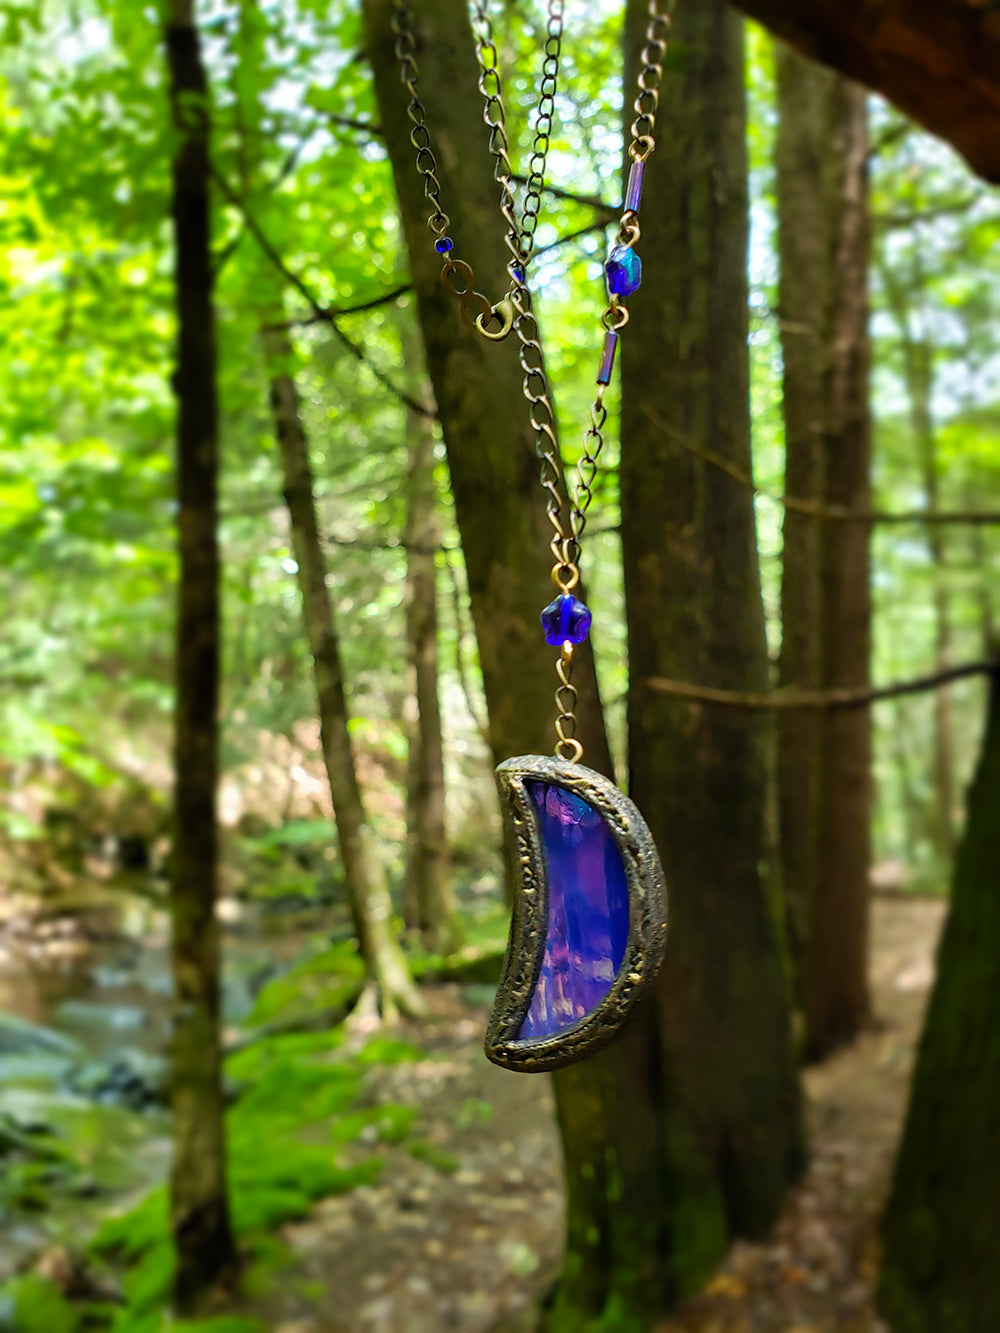 caelestis ignis ~ Iridescent Stained Glass Amulet